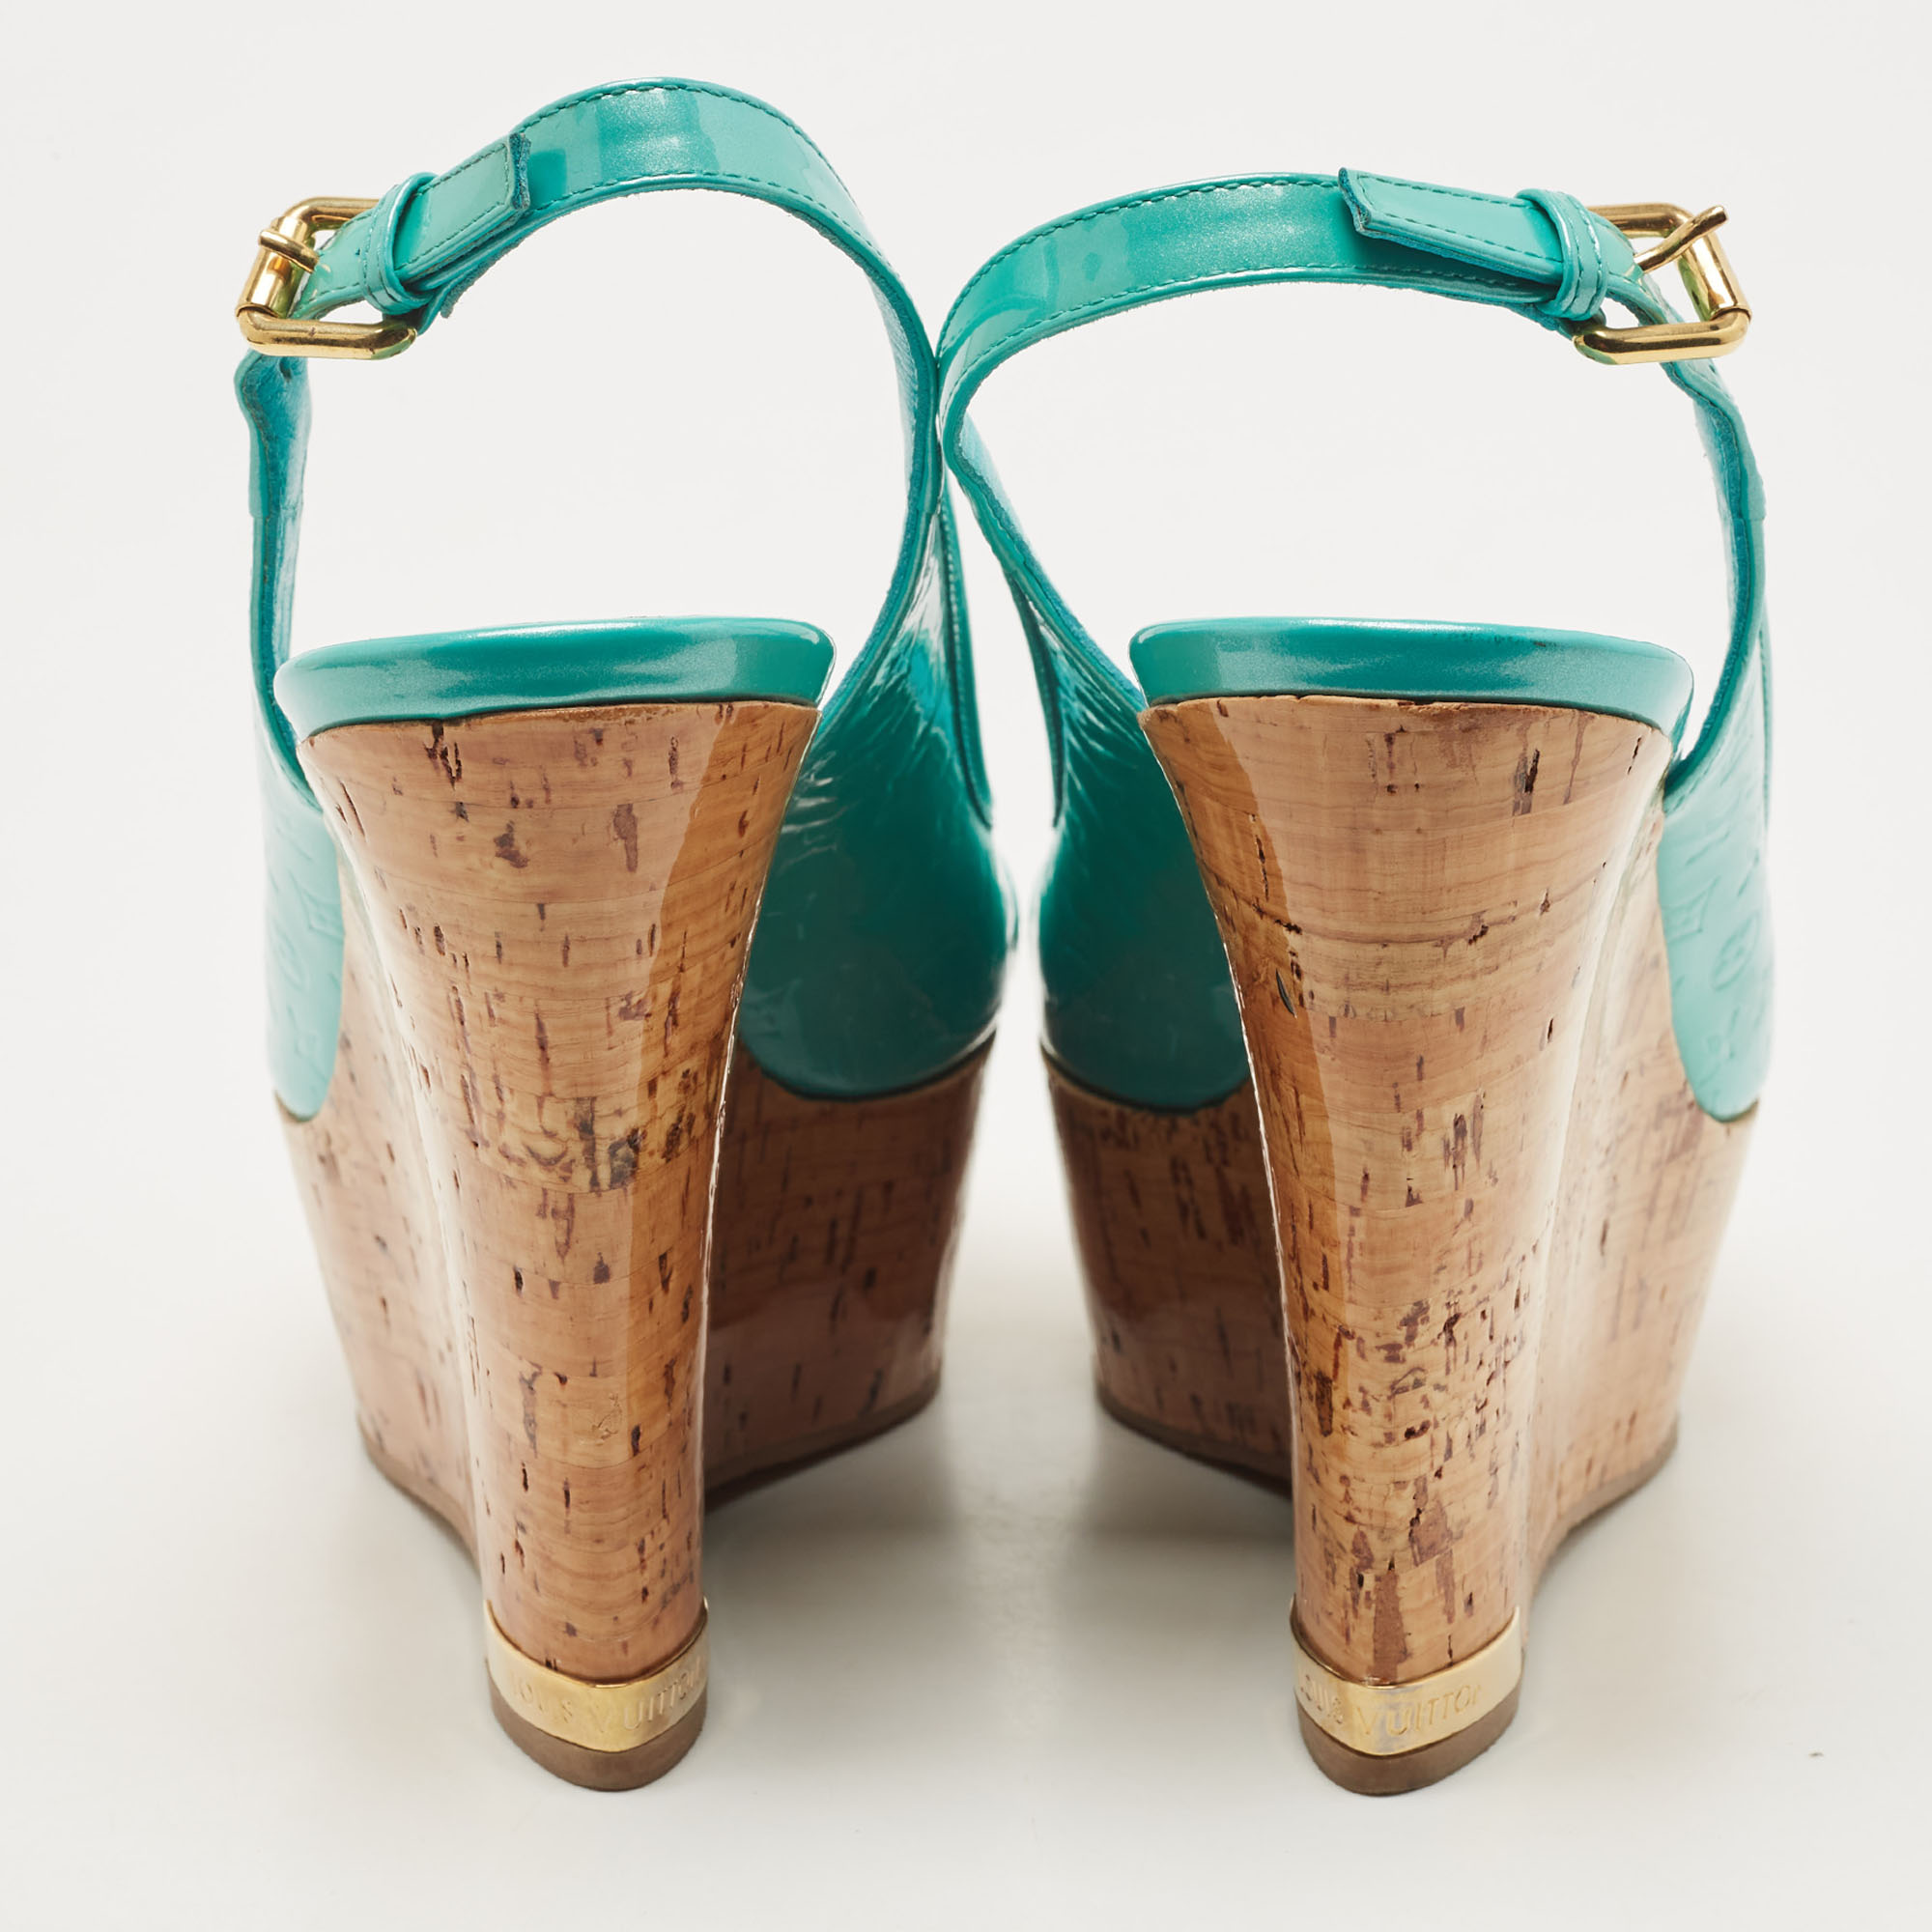 Louis Vuitton Turquoise Monogram Embossed Patent Leather Cork Wedge Slingback Sandals Size 37.5